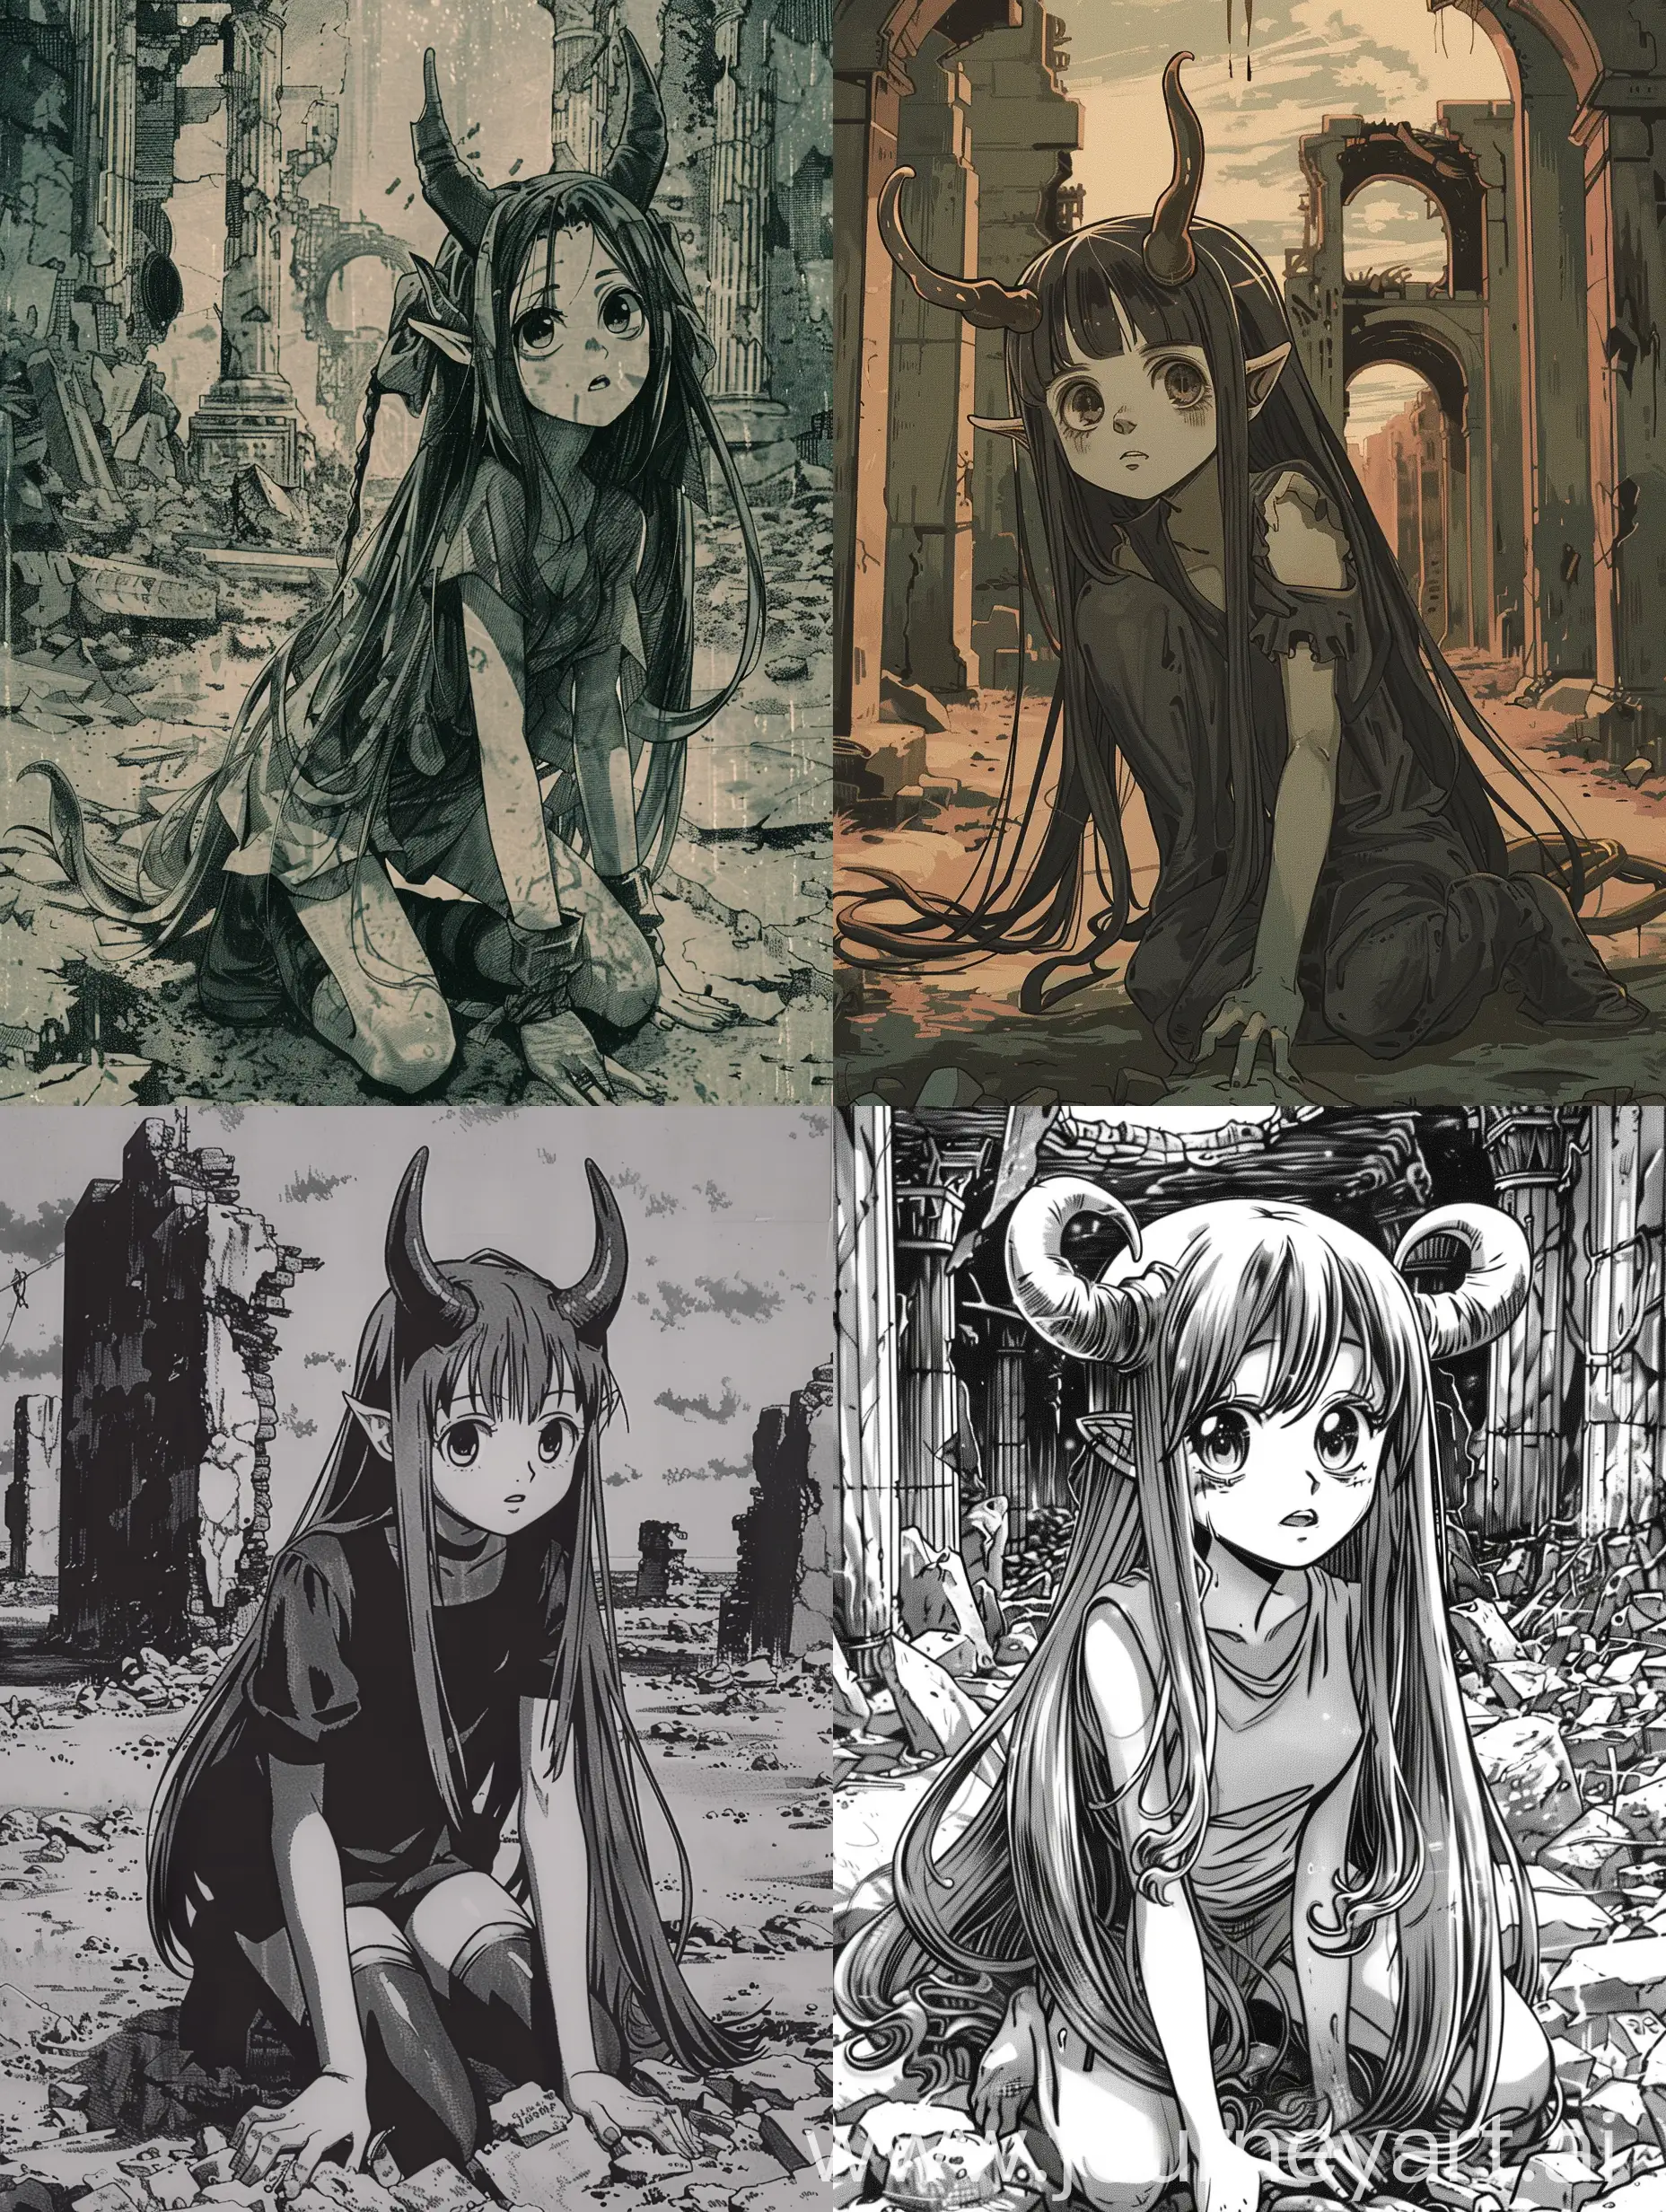 Devil girl character reminiscent of 90's anime and Studio Ghibli. She has large, expressive eyes reflecting innocence and mischief. Her long, flowing hair adorned with horns cascades around her. In a distopic ruin. Kneeling basking in the beauty of her surrounding. Like a scene from a Ghibli film. (VHS effect)